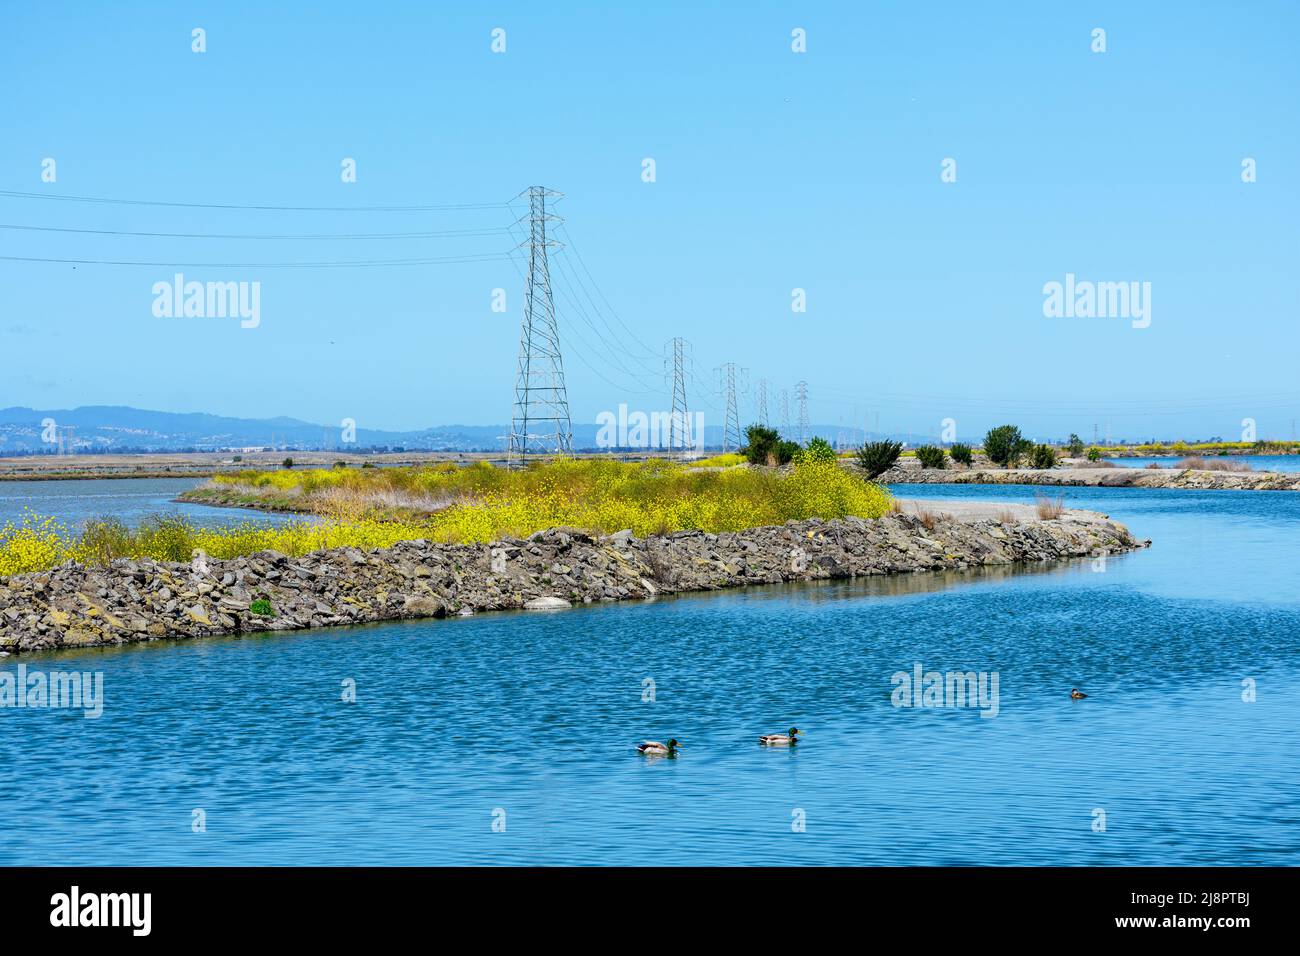 High voltage electricity power lines and transmission towers crossing the ponds, marshes and levees in San Francisco Bay, California. Stock Photo